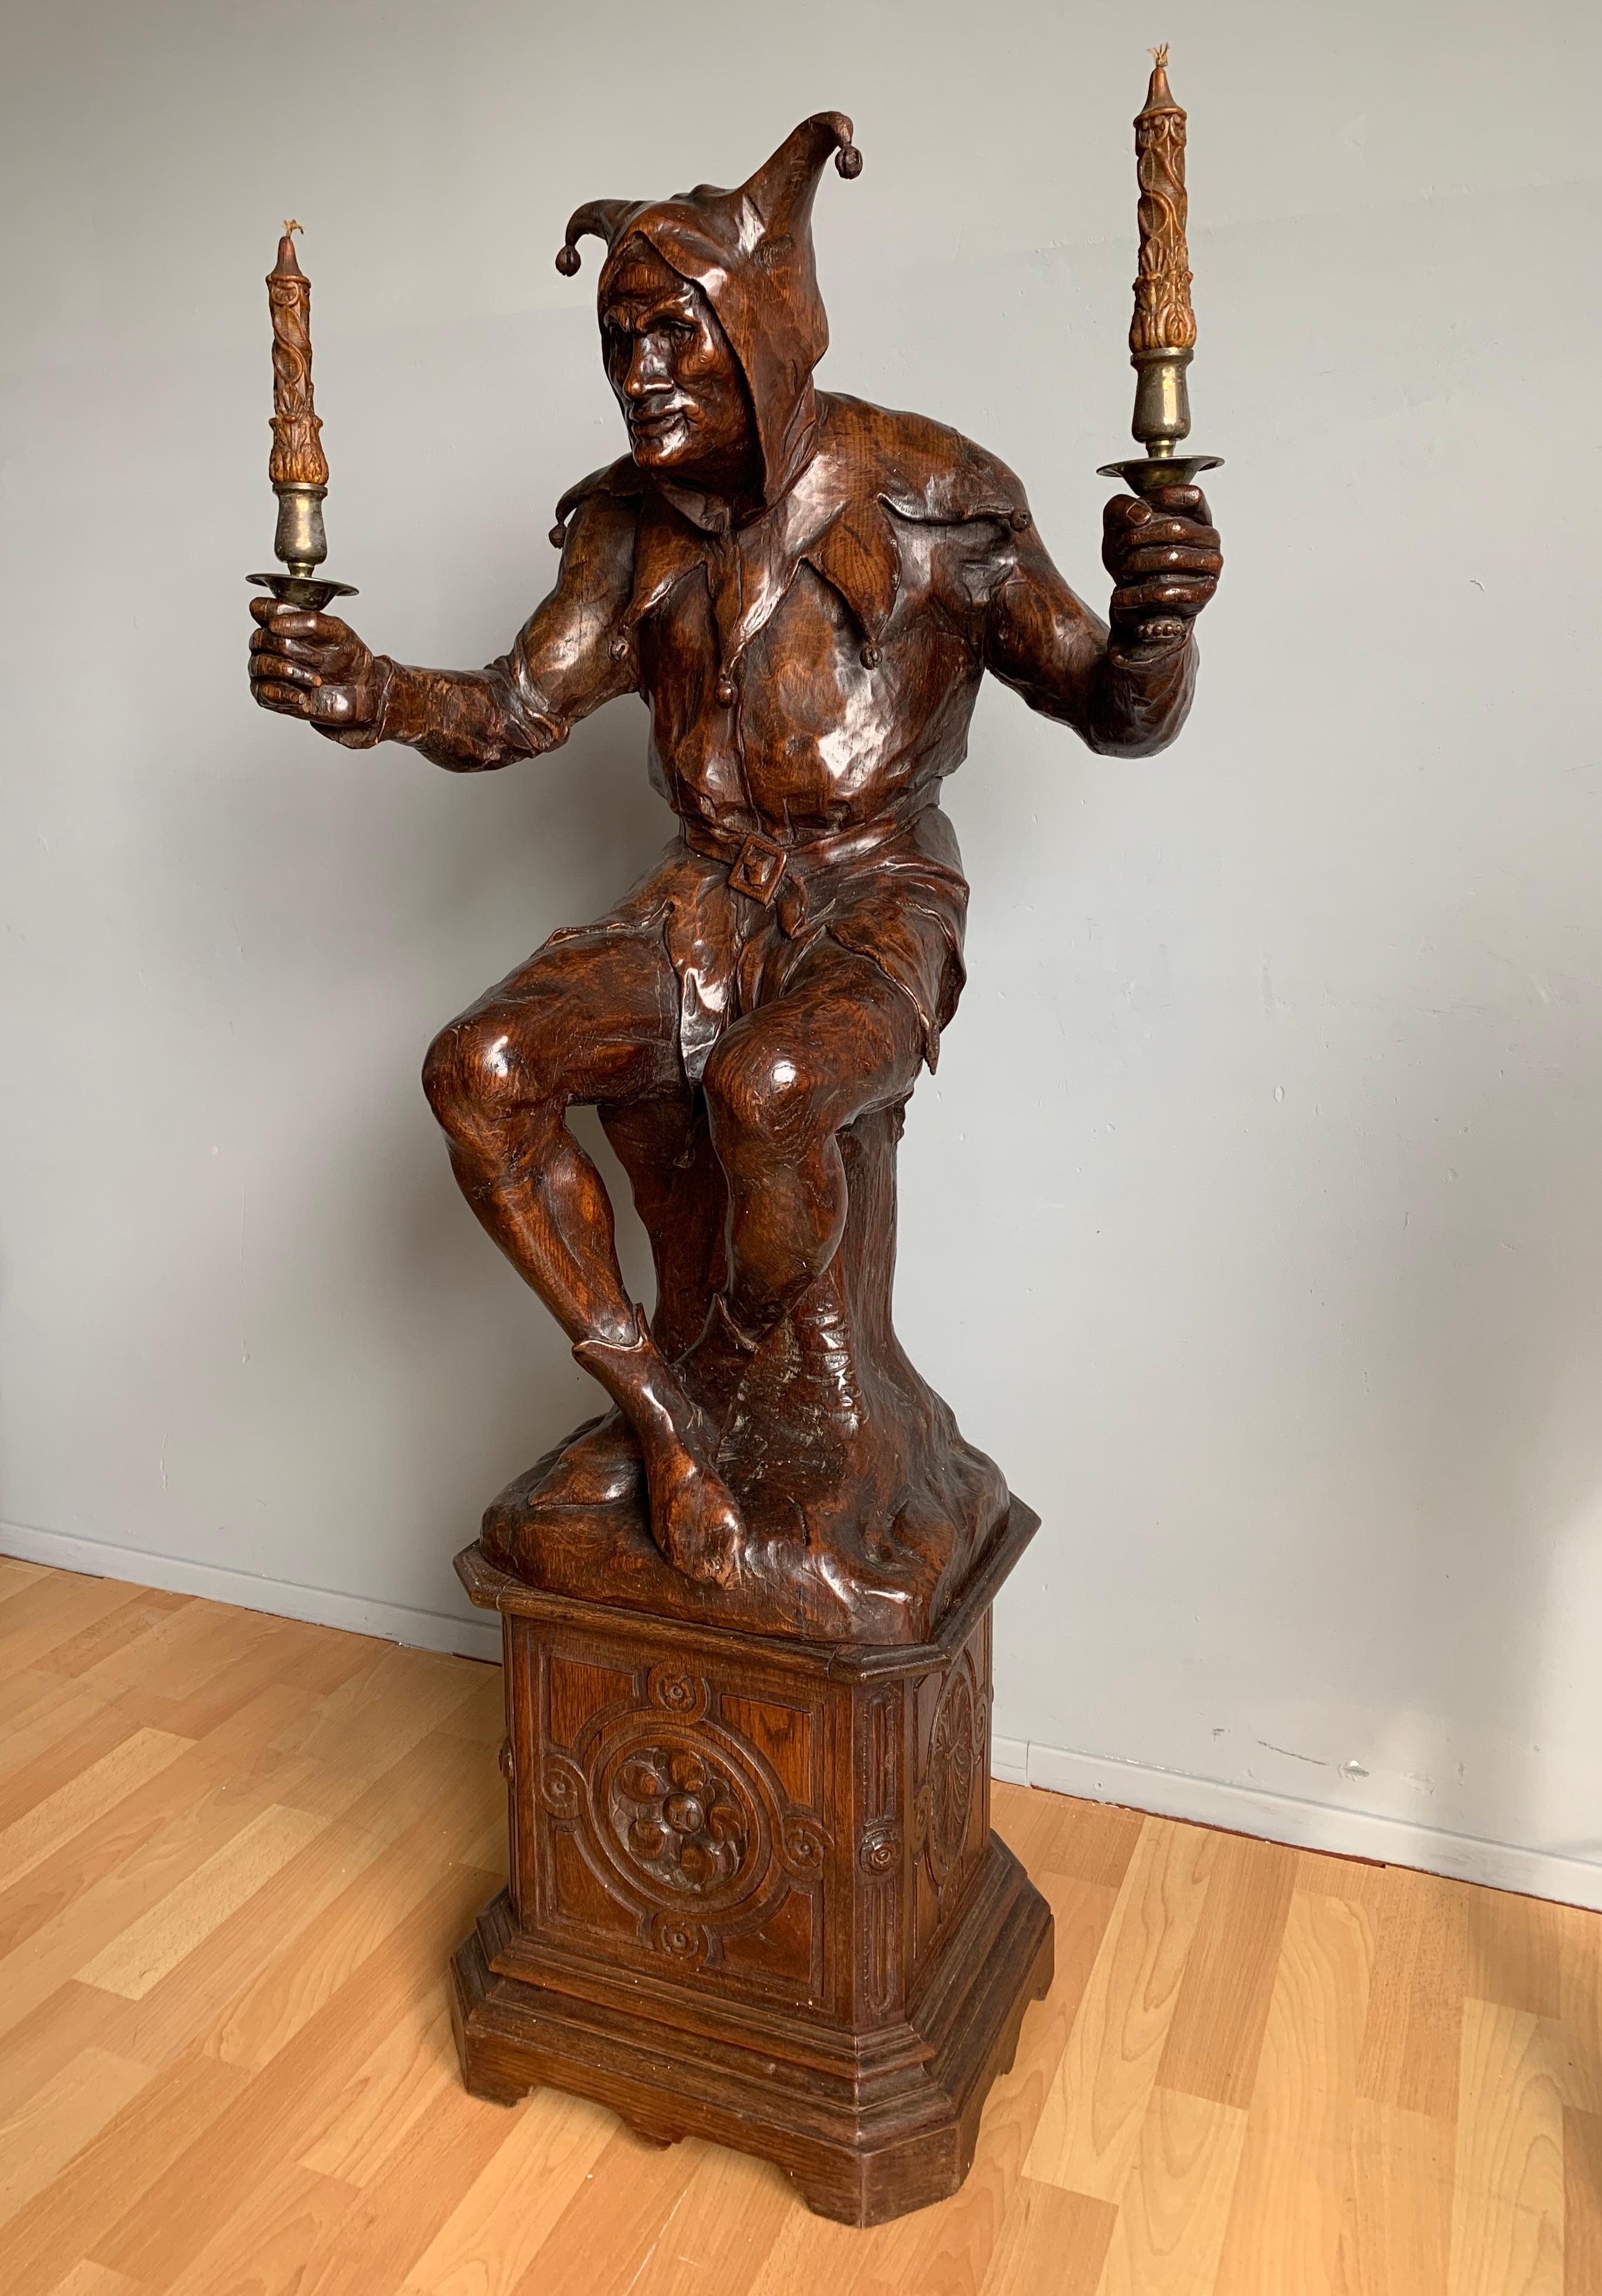 Marvelous antique French jester sculpture.

This large and amazing sculpture of a sitting court jester in the Renaissance Style truly is a rare find. The incredible details in the clothes, his facial features and his perfect body posture tell us